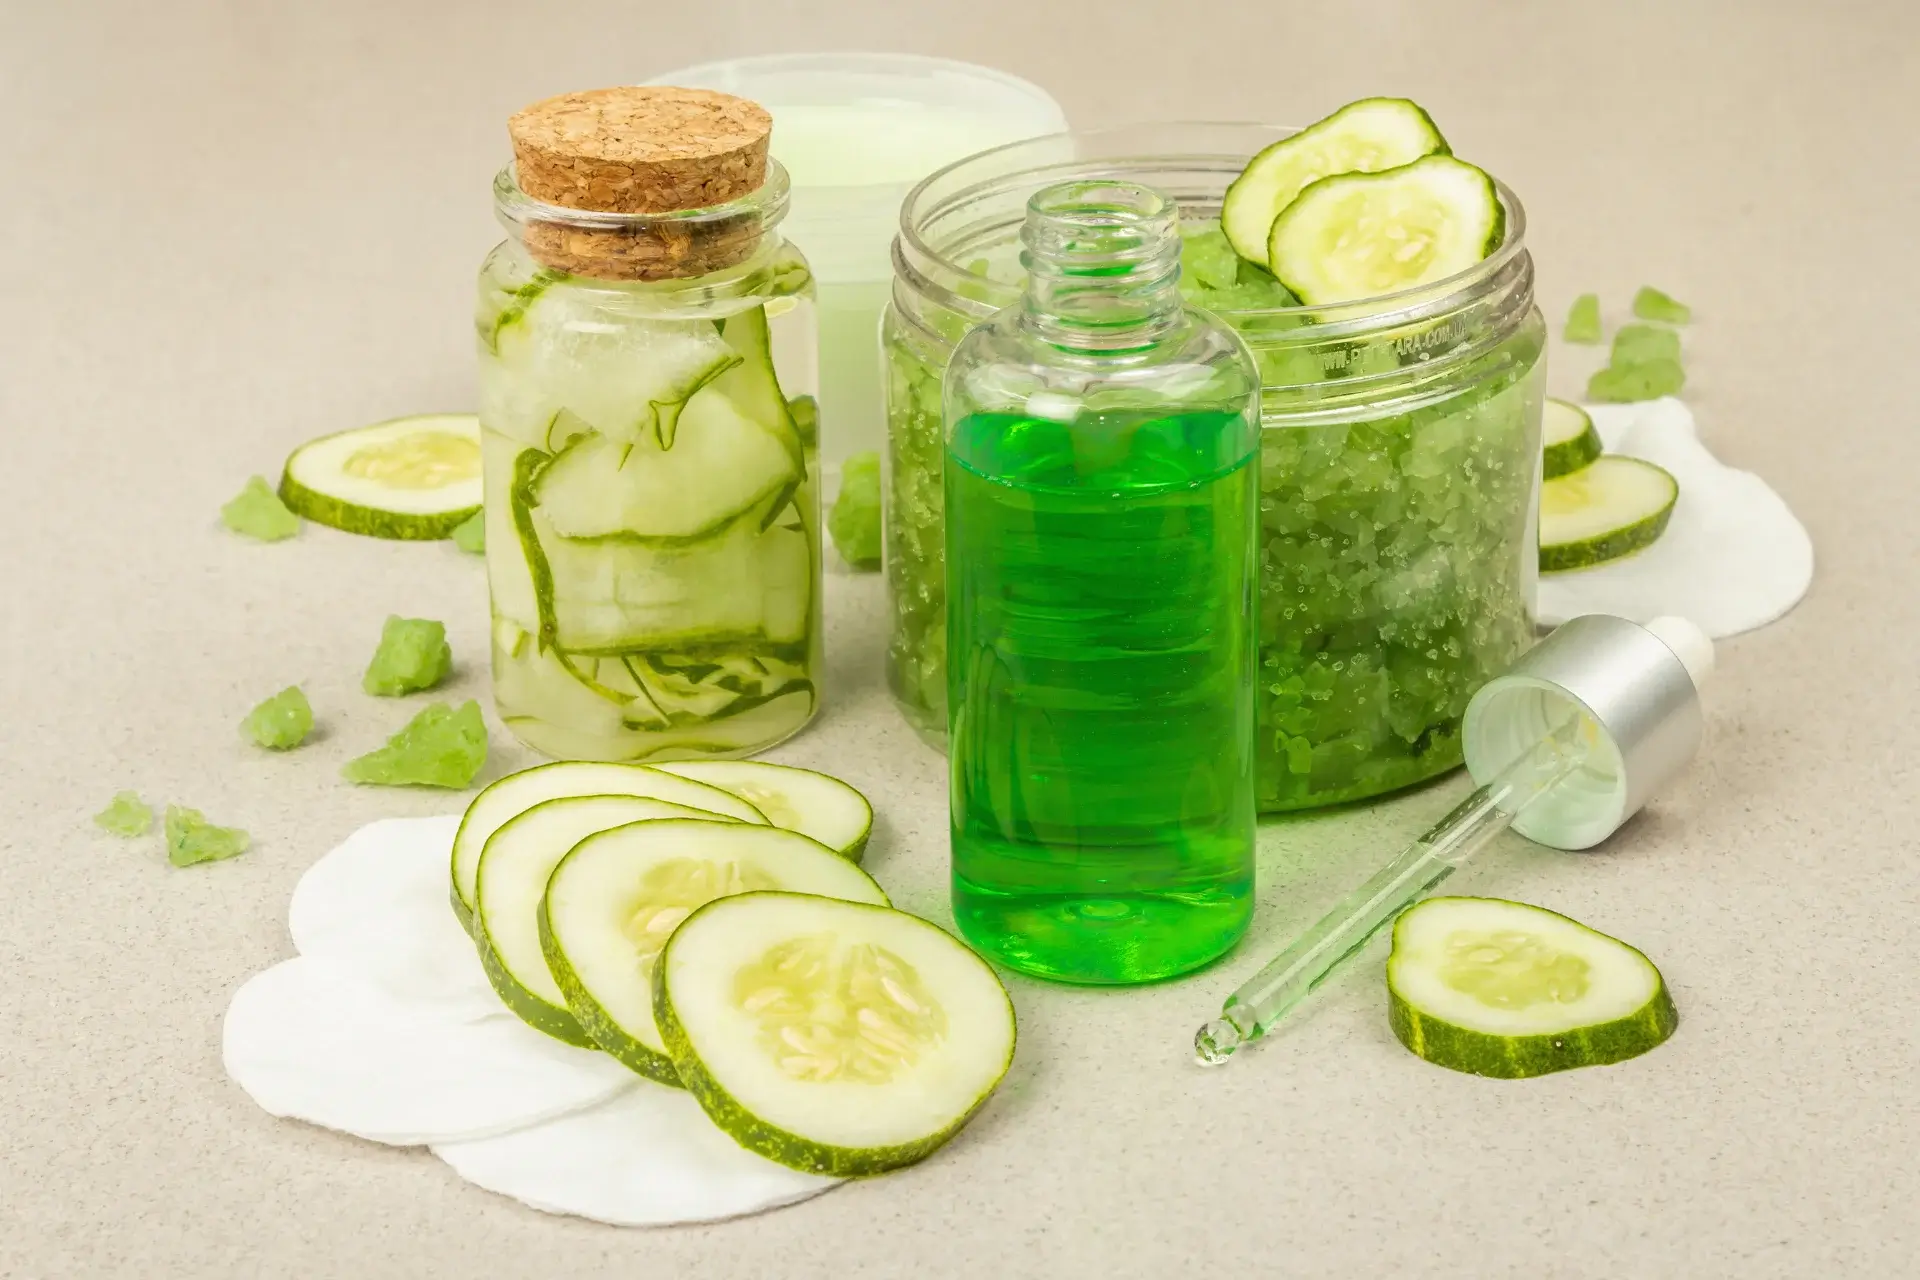 A table topped with jars of cucumber slices and green liquid.